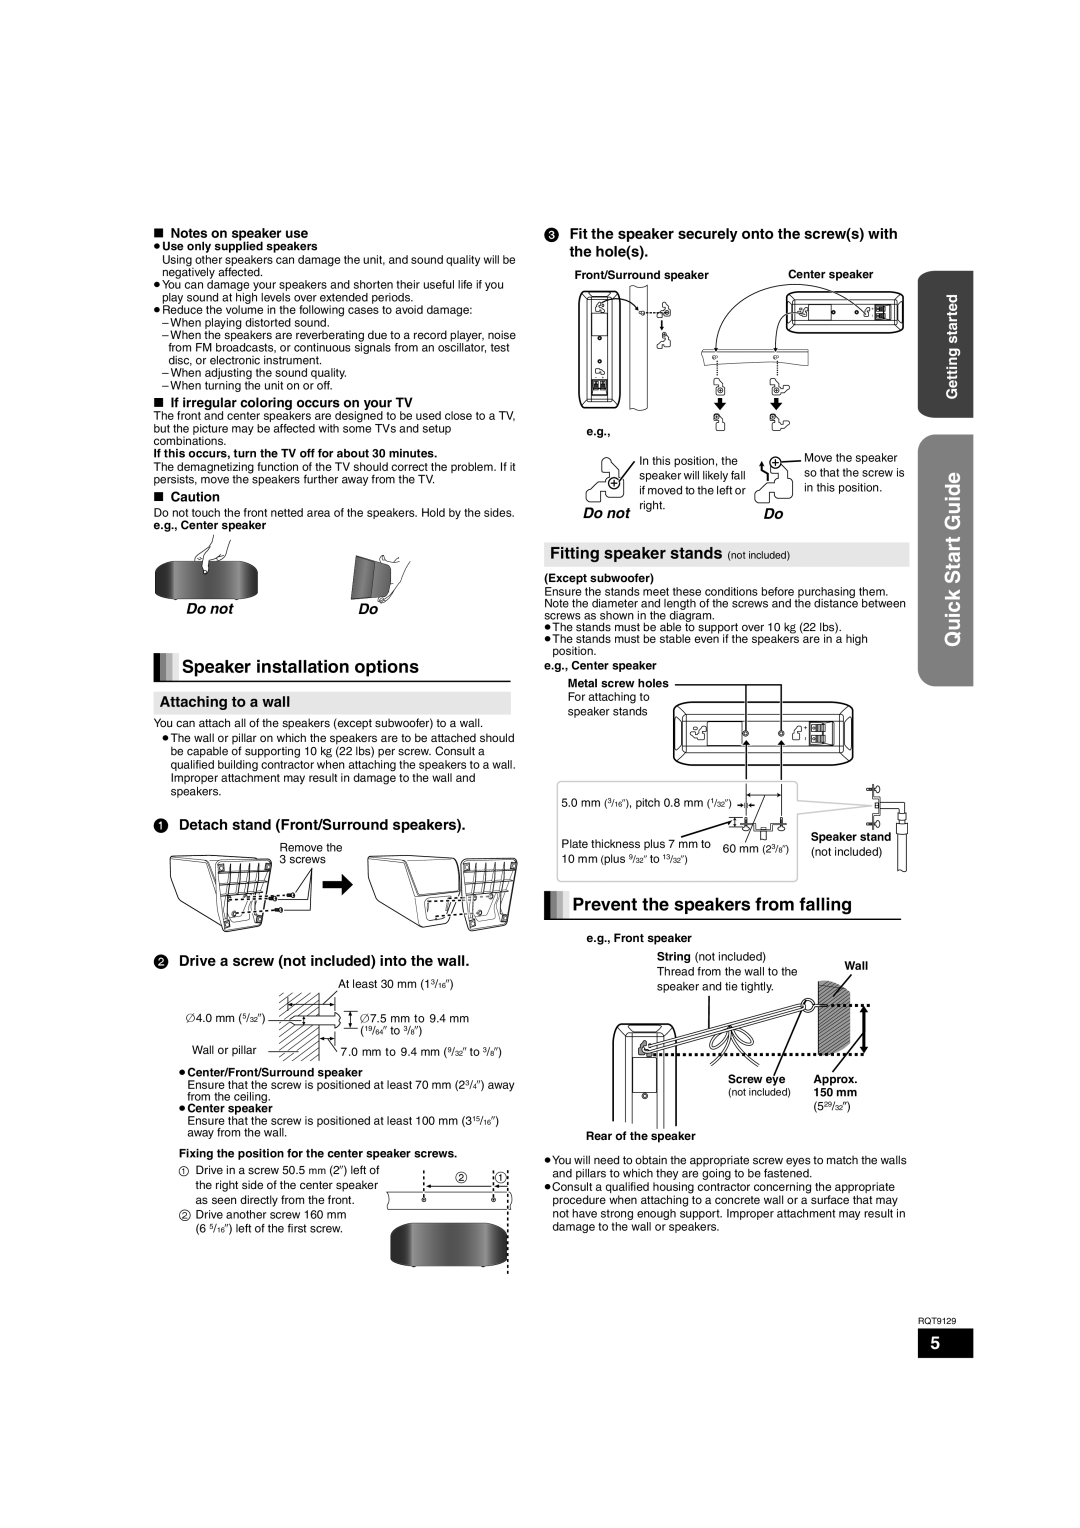 Panasonic SC-BT100 Start, Speaker installation options, Prevent the speakers from falling, Do not, Attaching to a wall 